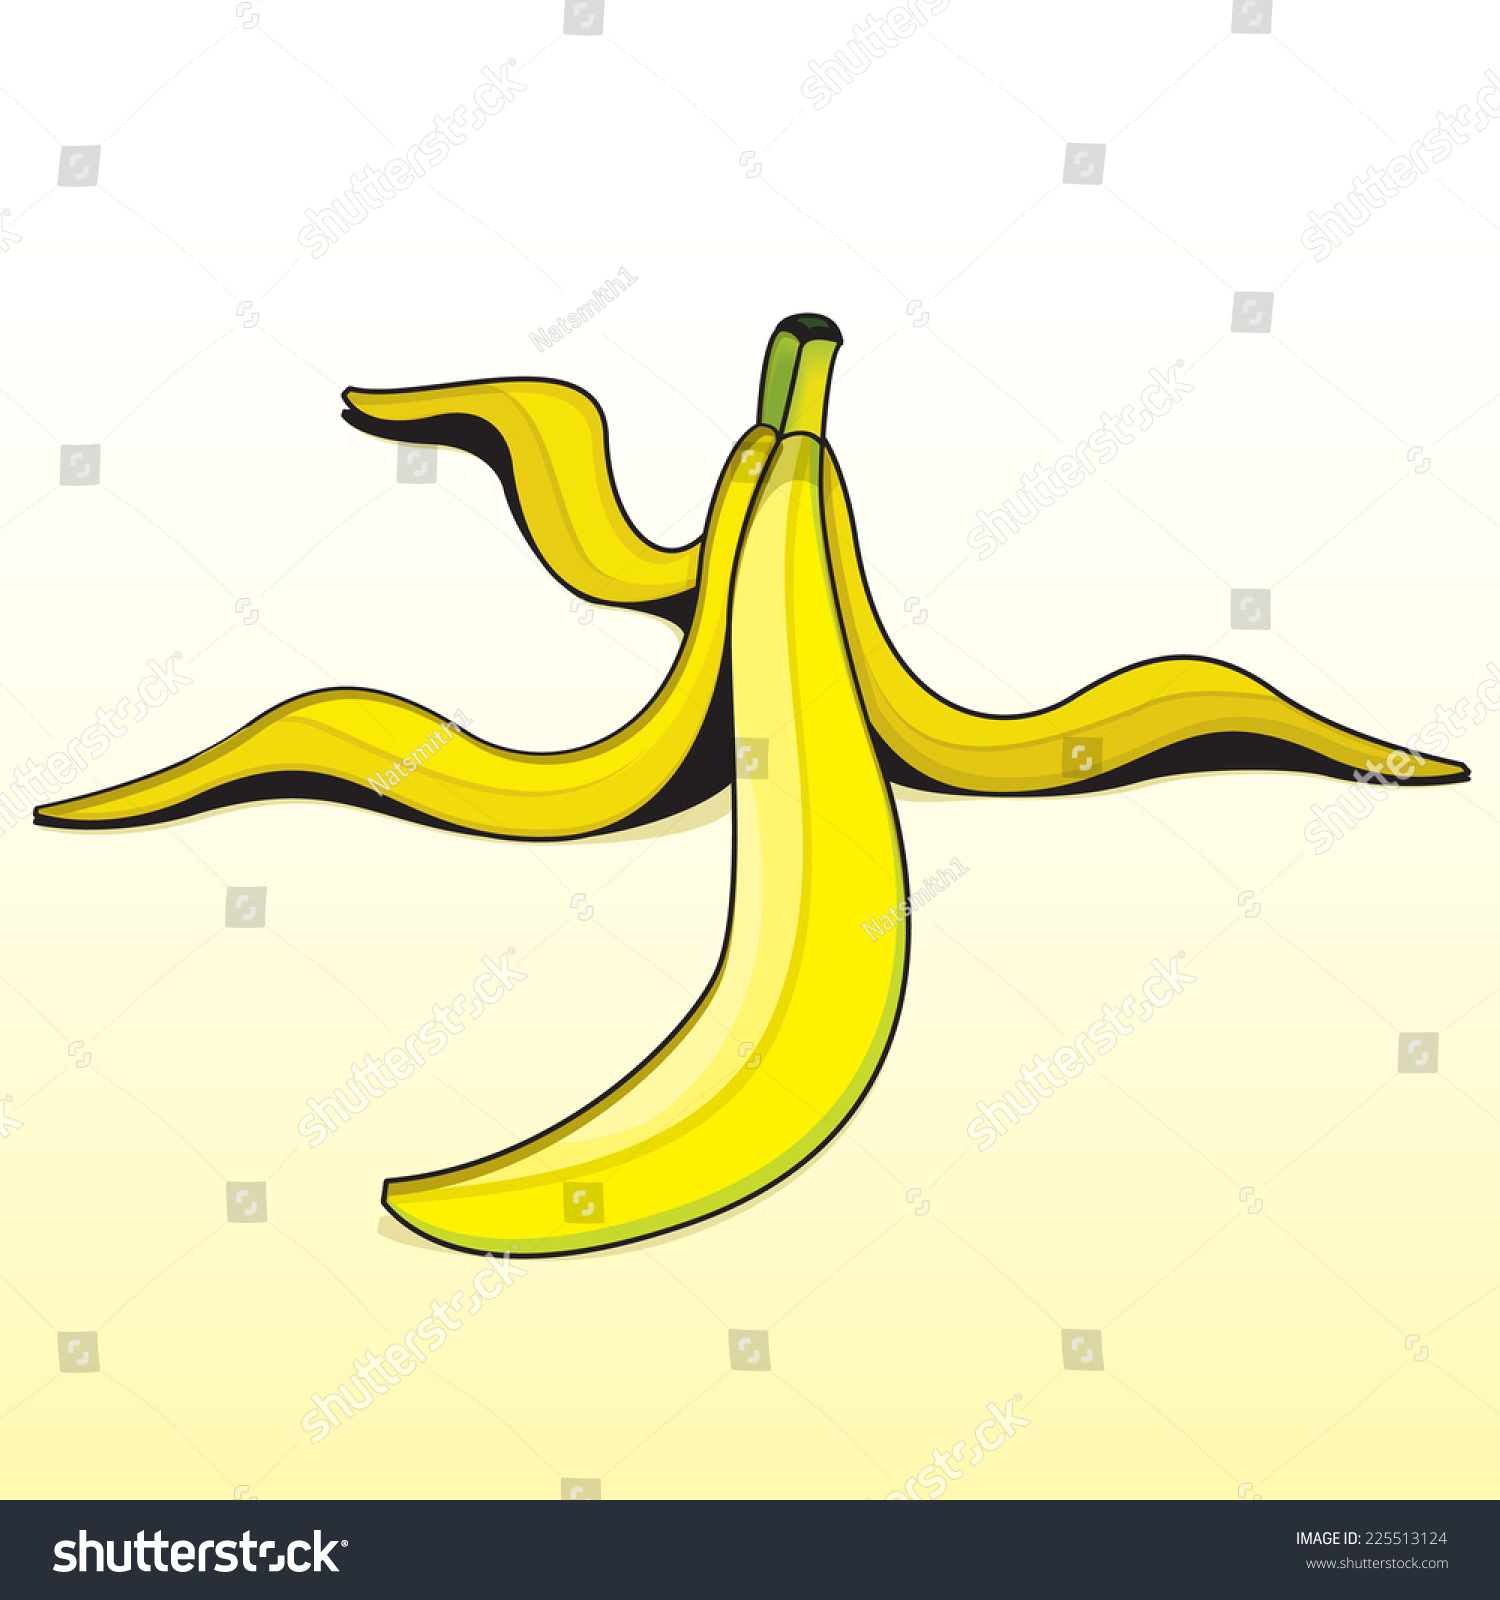 Vector Drawing Of A / Banana Peel / Easy To Edit Groups And Layers, No ...